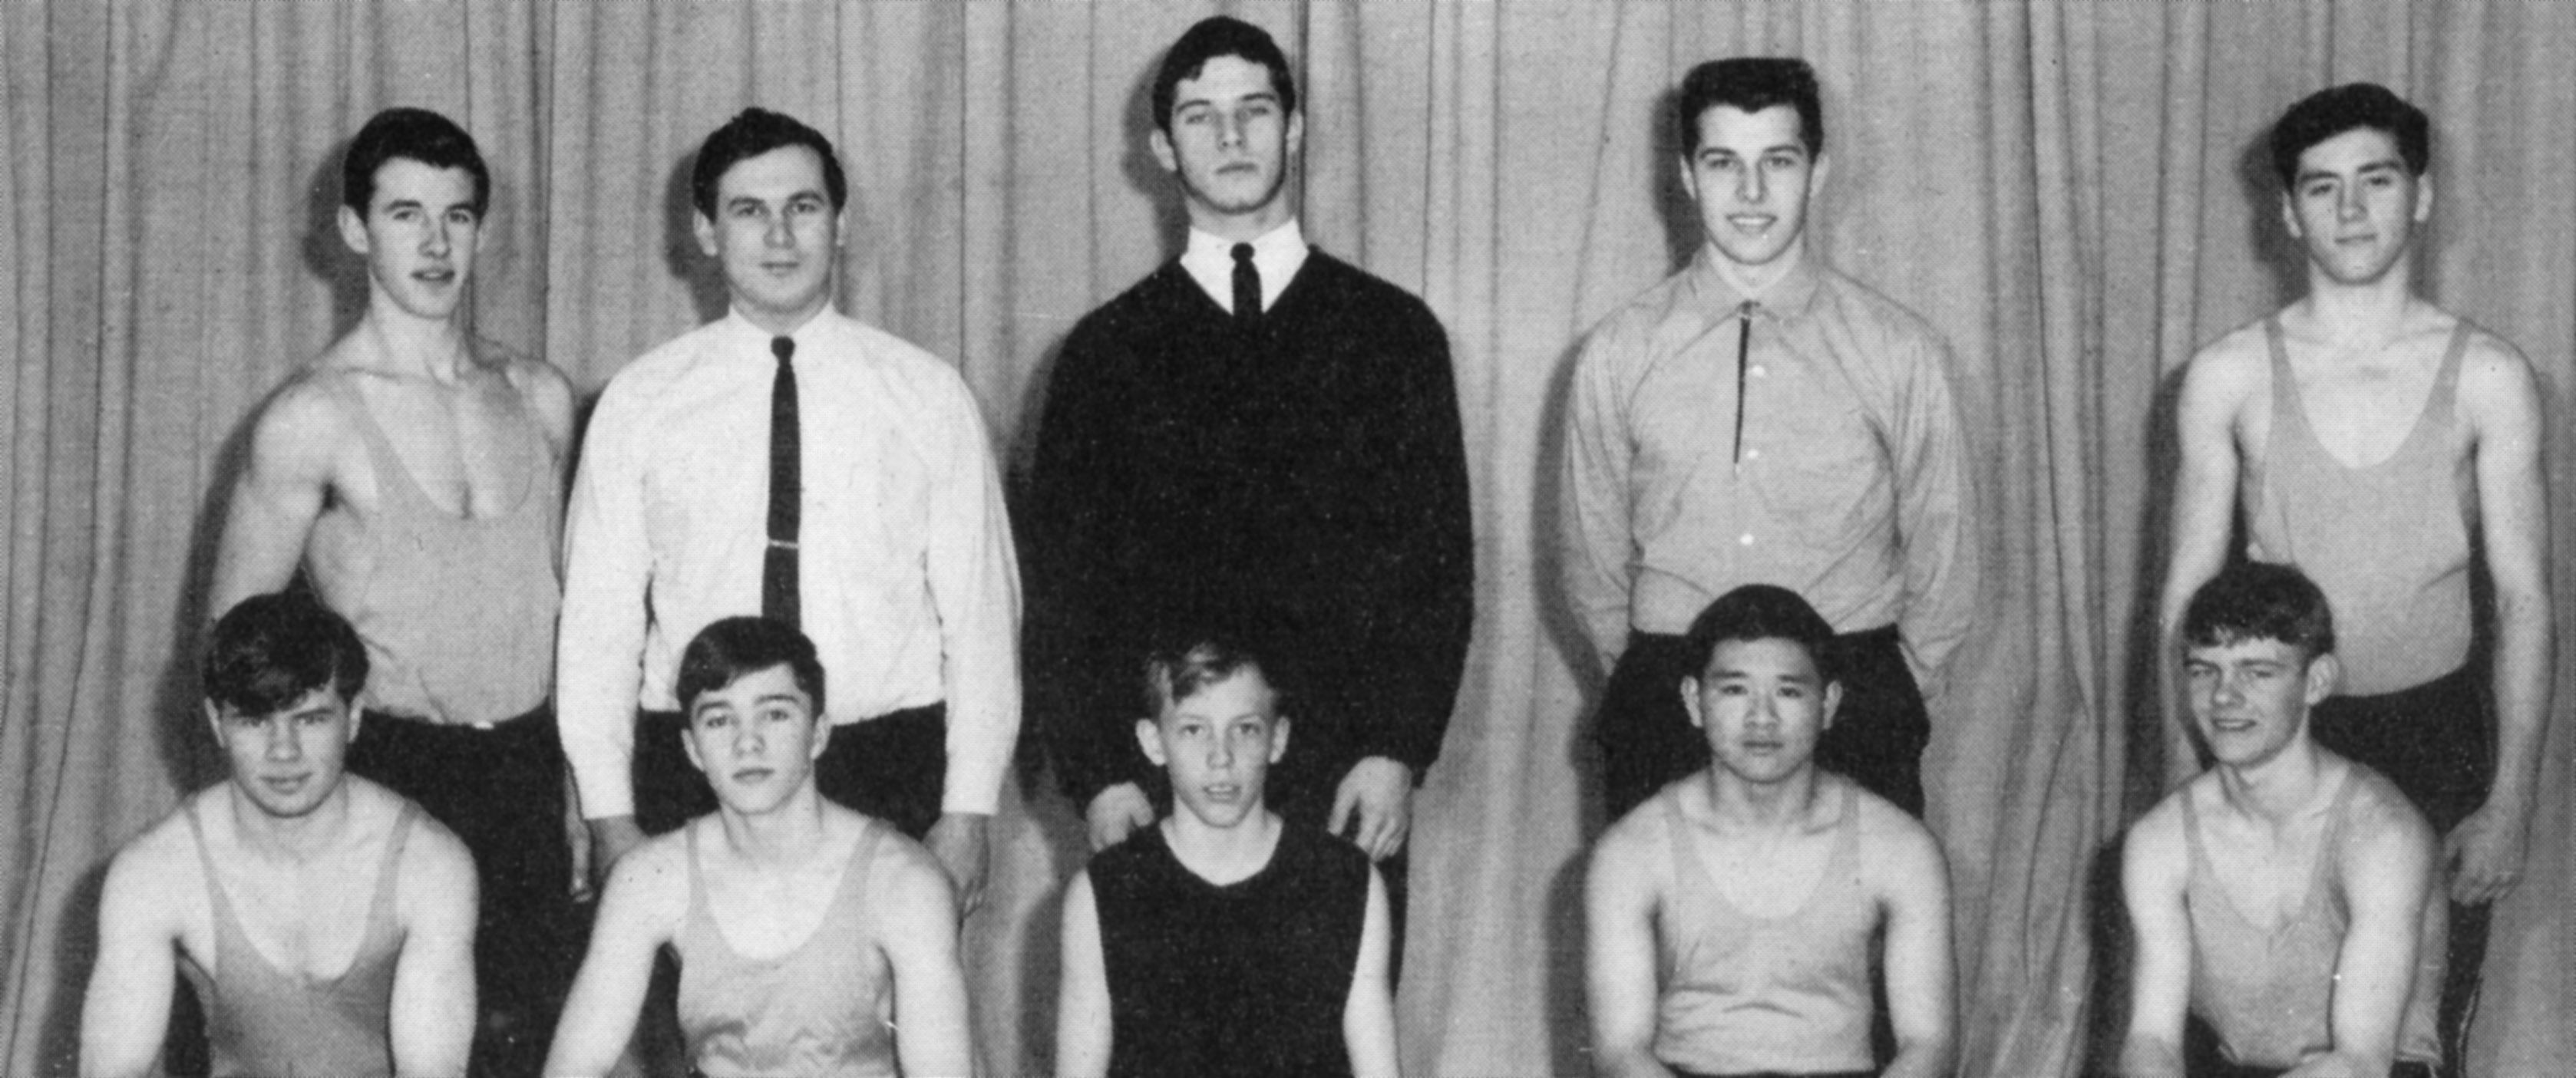 (Click to magnify) FRONT ROW: Brian Munro, N. Clark, D. Clark, D. Eng, B. Johnson; ***BACK ROW: T. Rice, A. Jollimore, Mike Shadforth, Bert Blackburn, T. Cox.